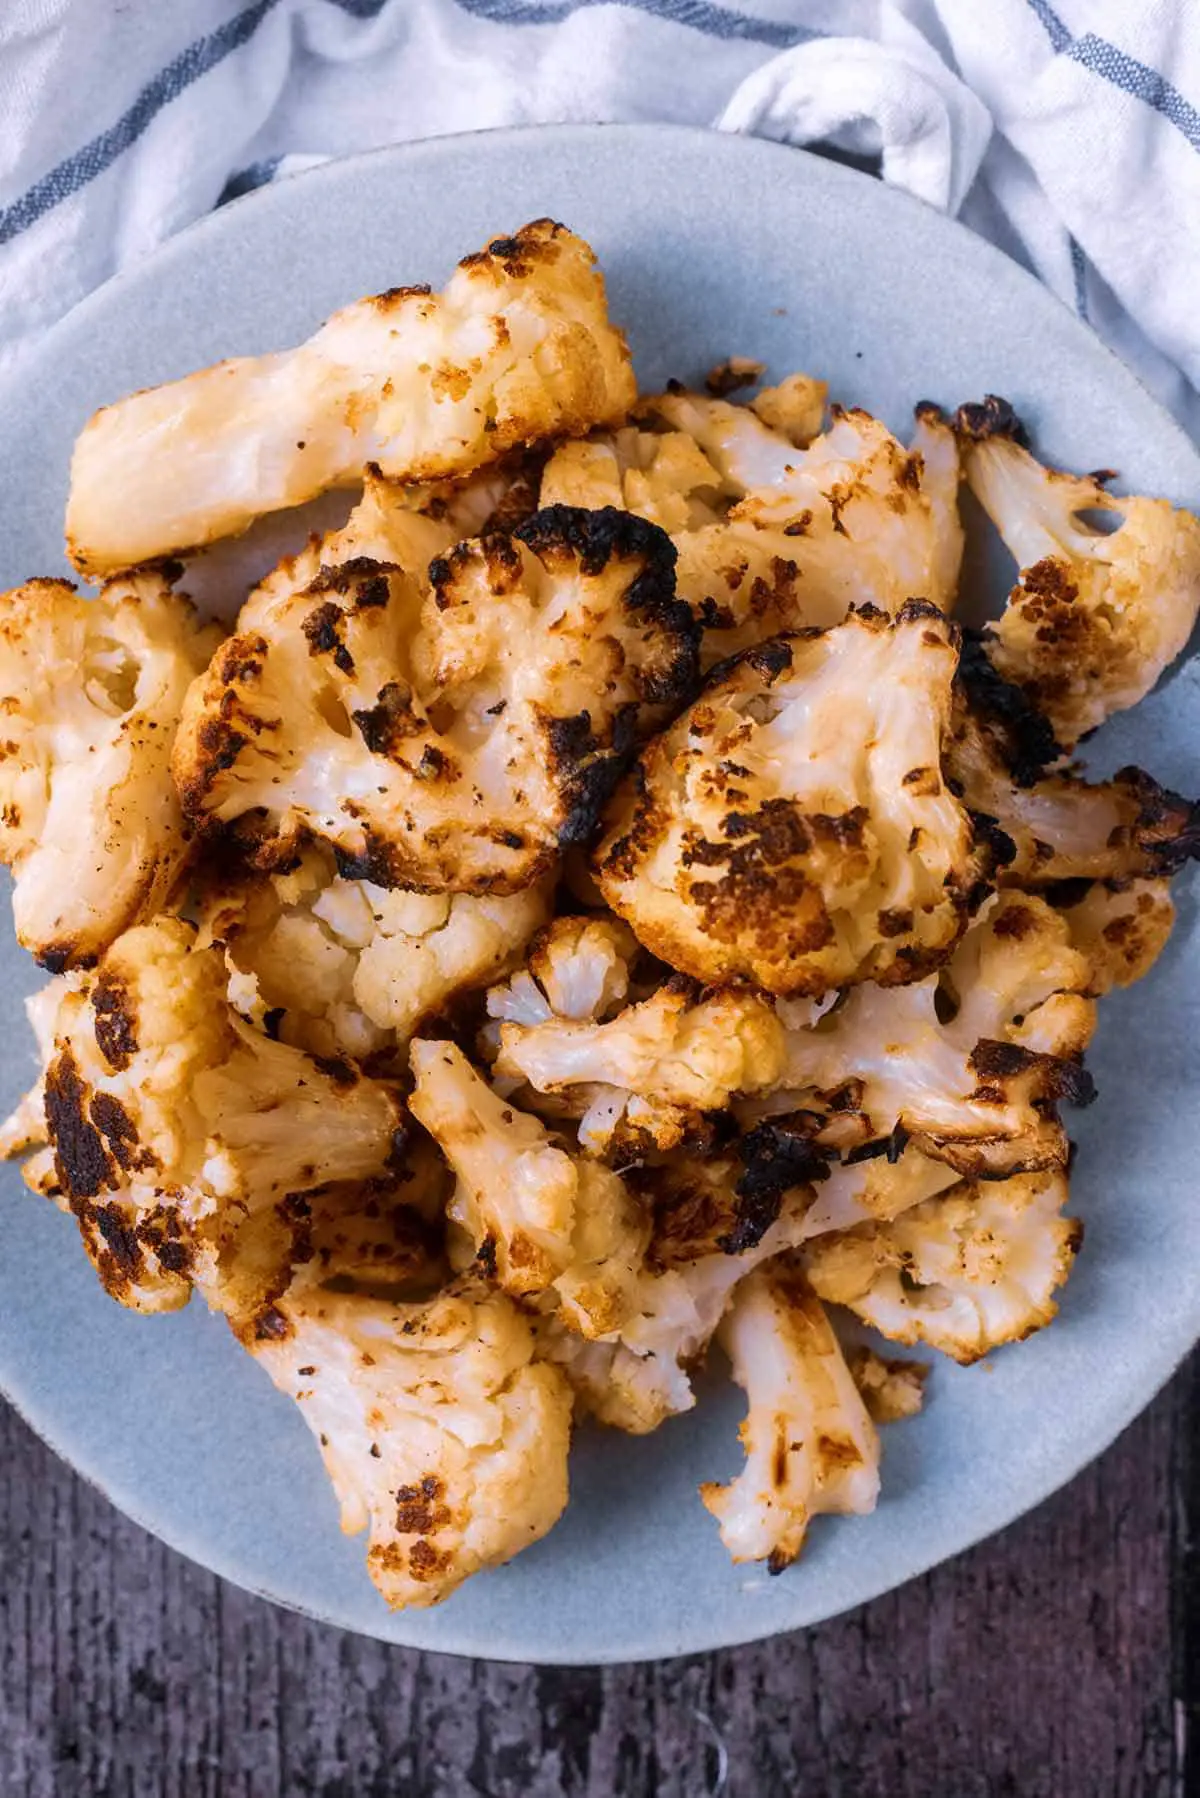 Cooked cauliflower with slightly charred edges on a grey plate.